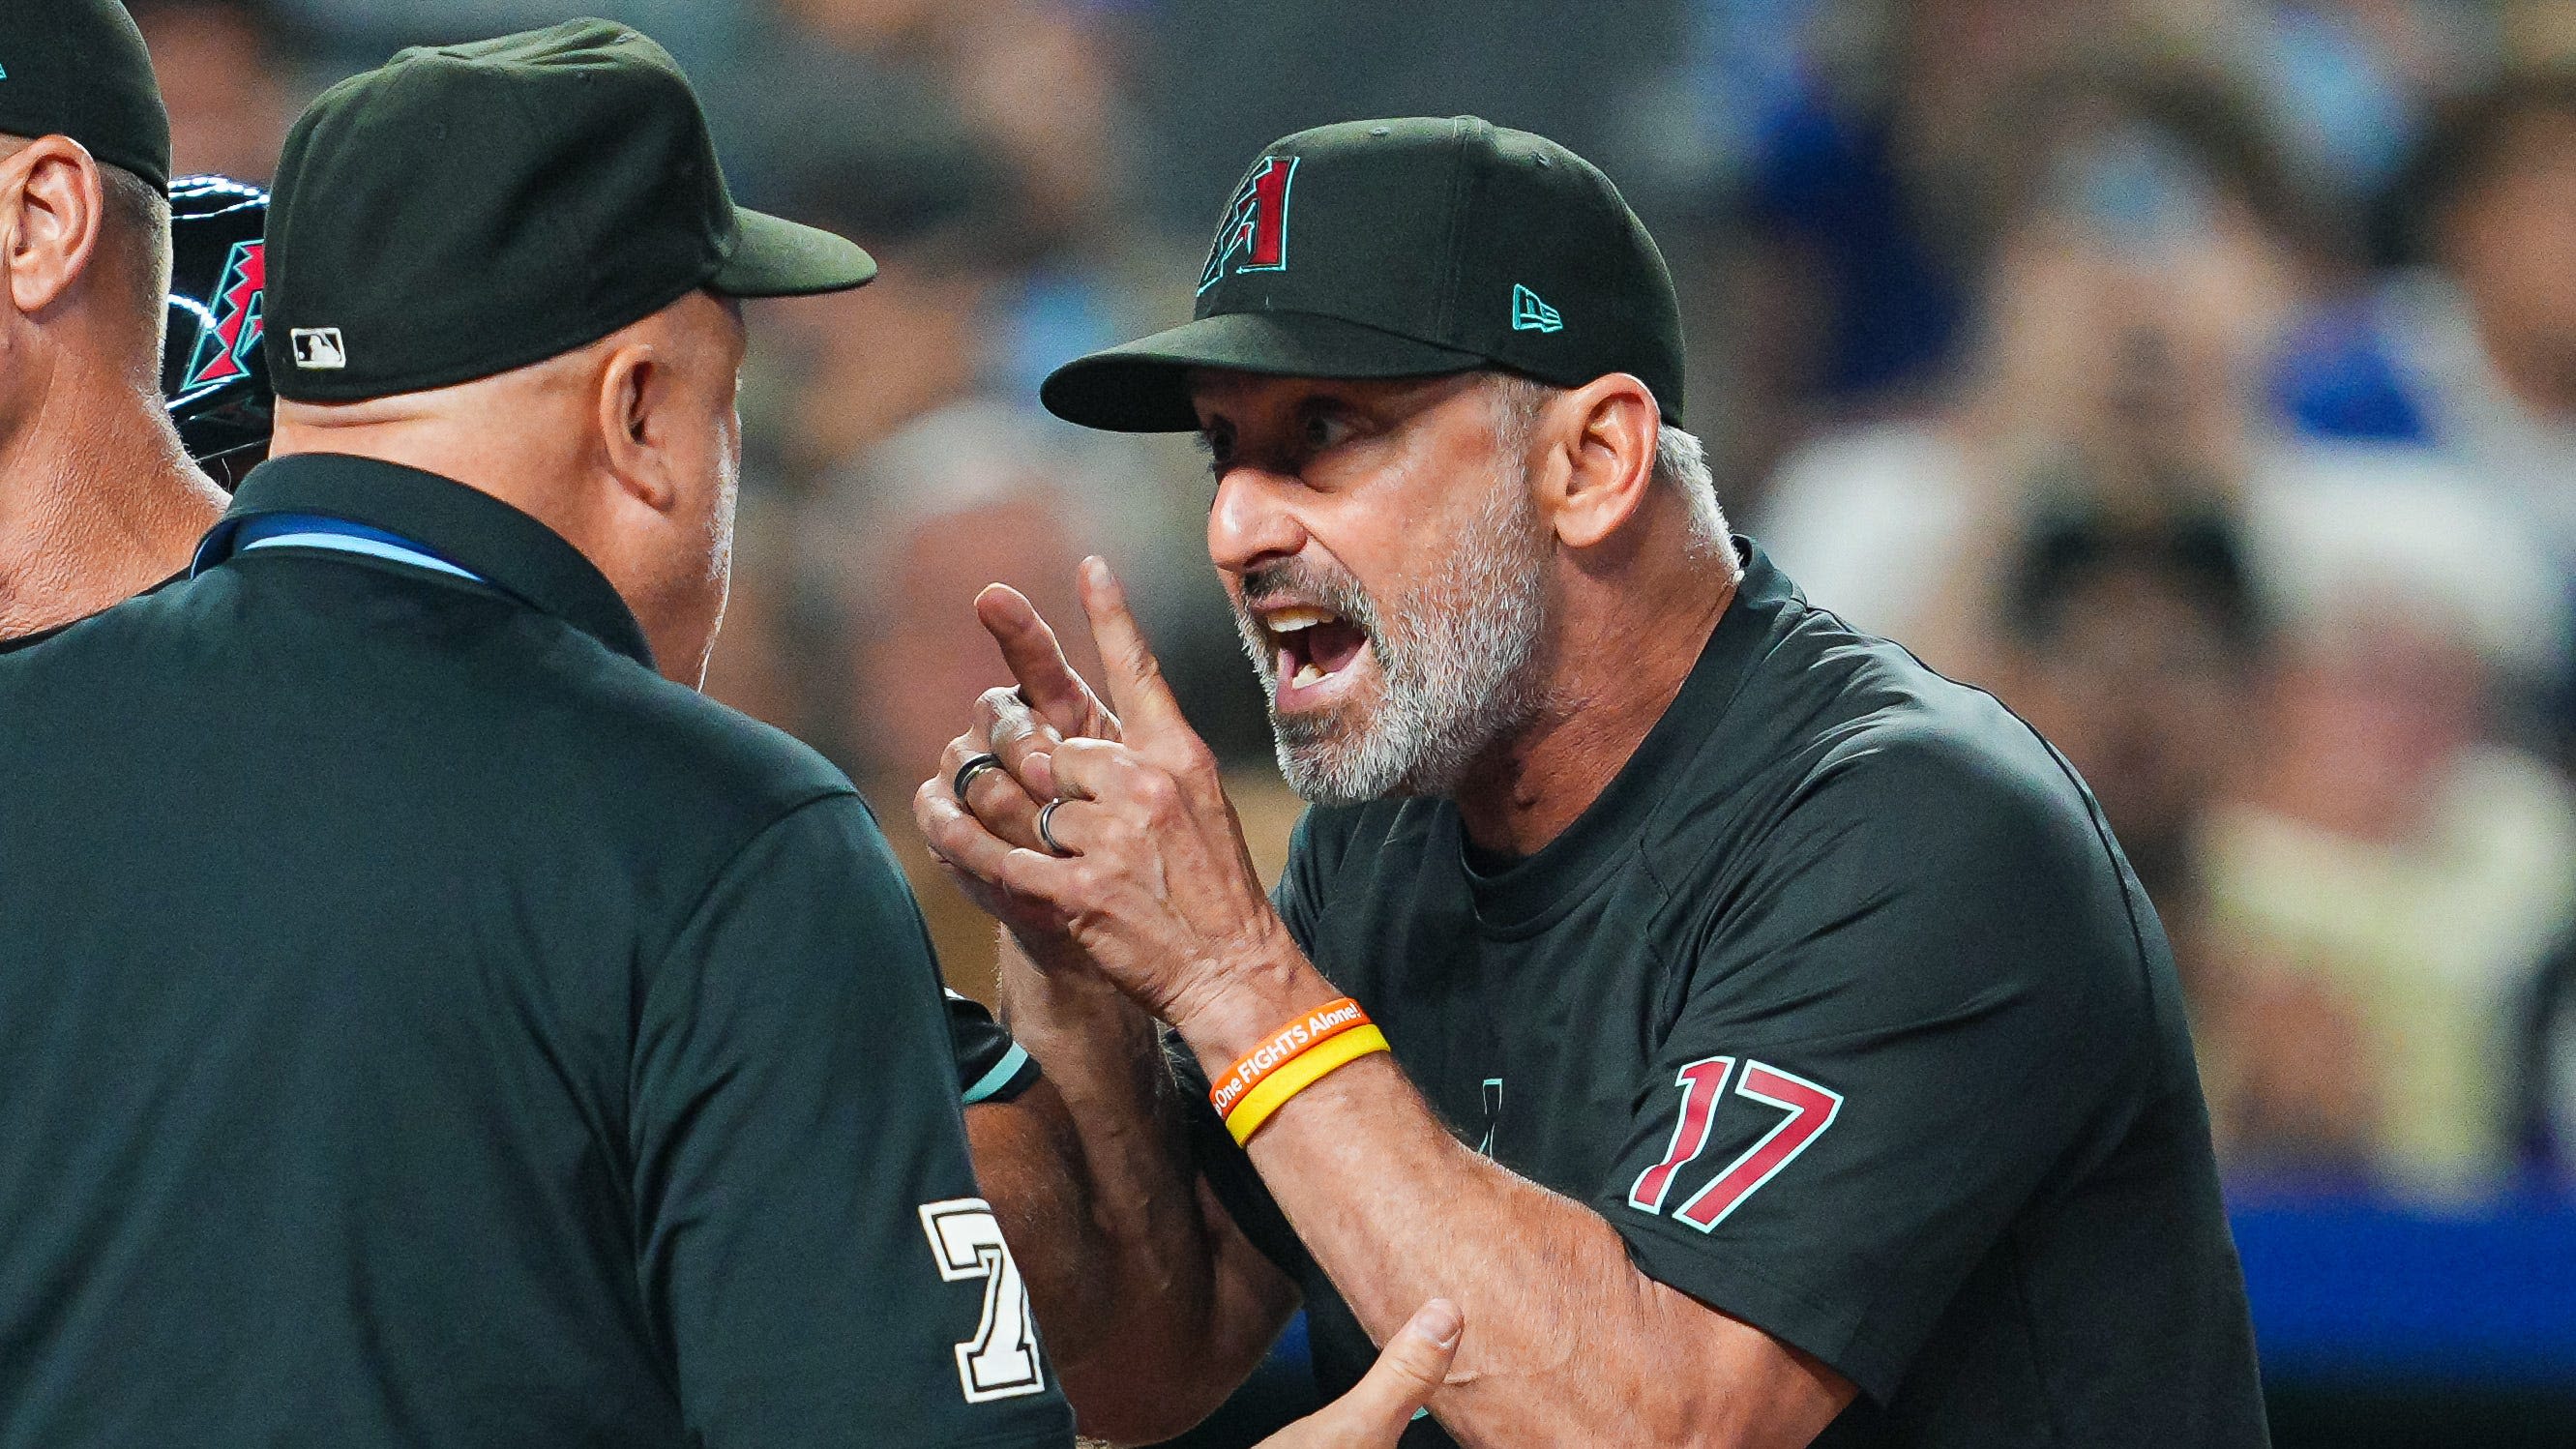 Torey Lovullo ejected in Diamondbacks' loss to Royals to open series